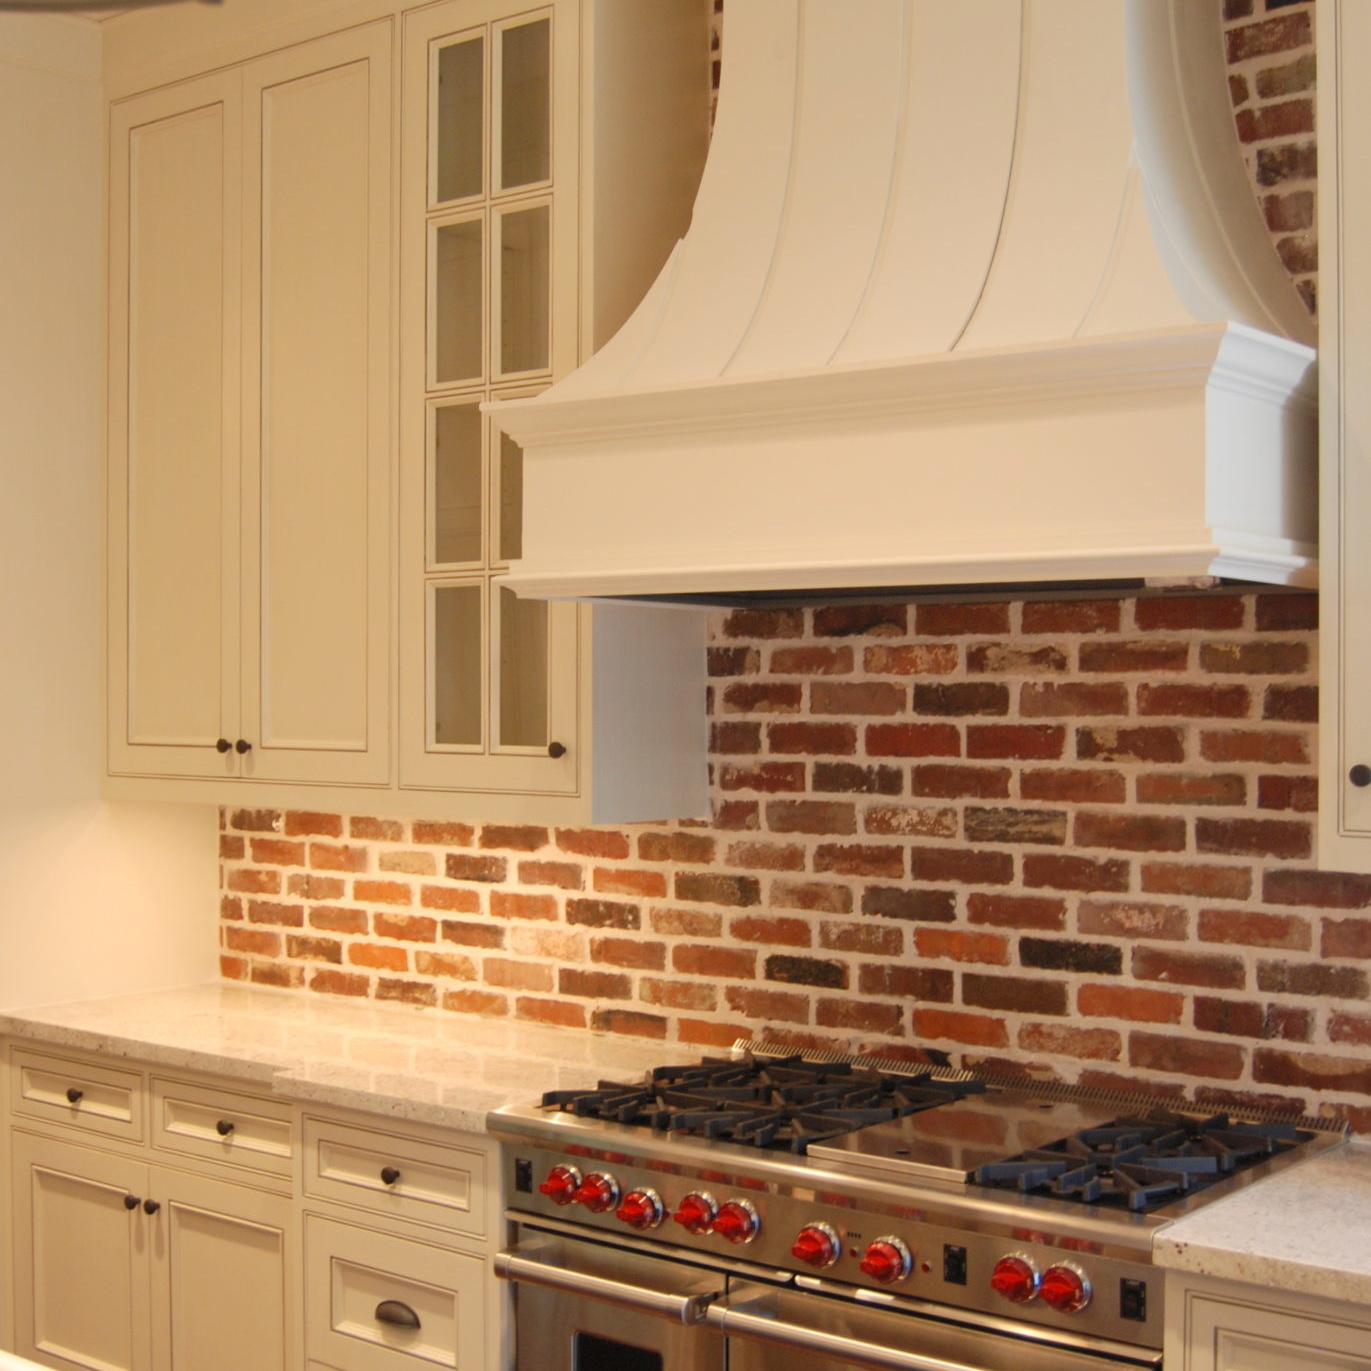 Newly remodeled kitchen with stainless steel stove and brick backsplash